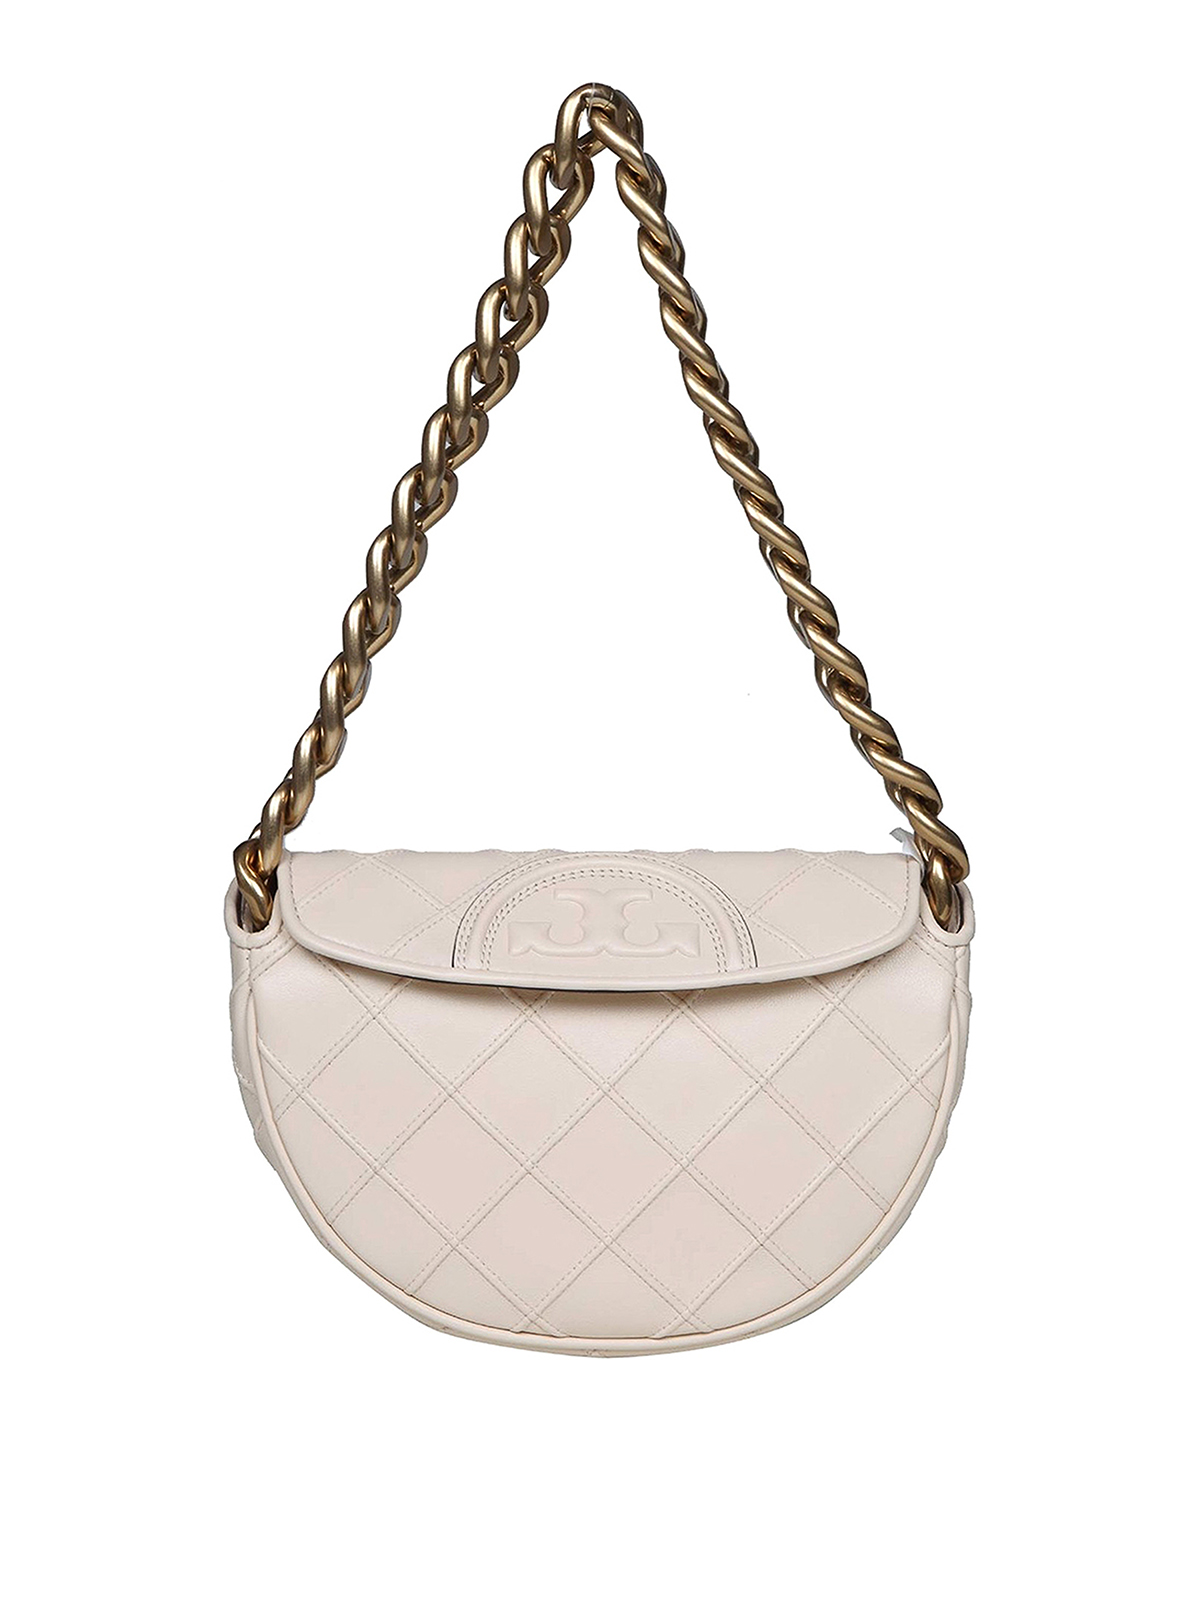 Tory Burch Bag In Quilted Leather And Chain In White